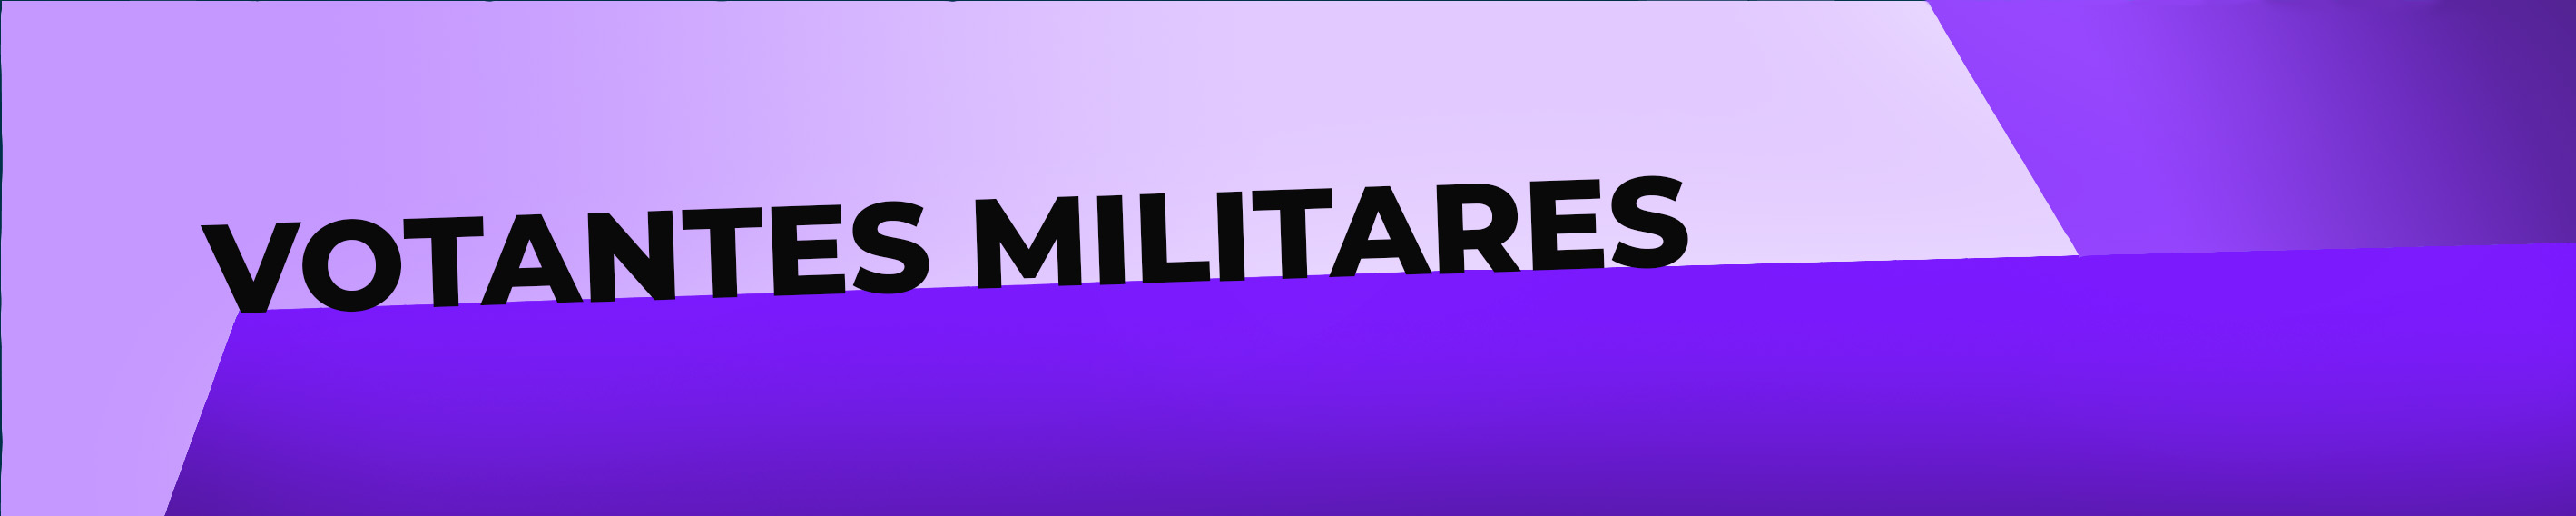 Military Voters Banner